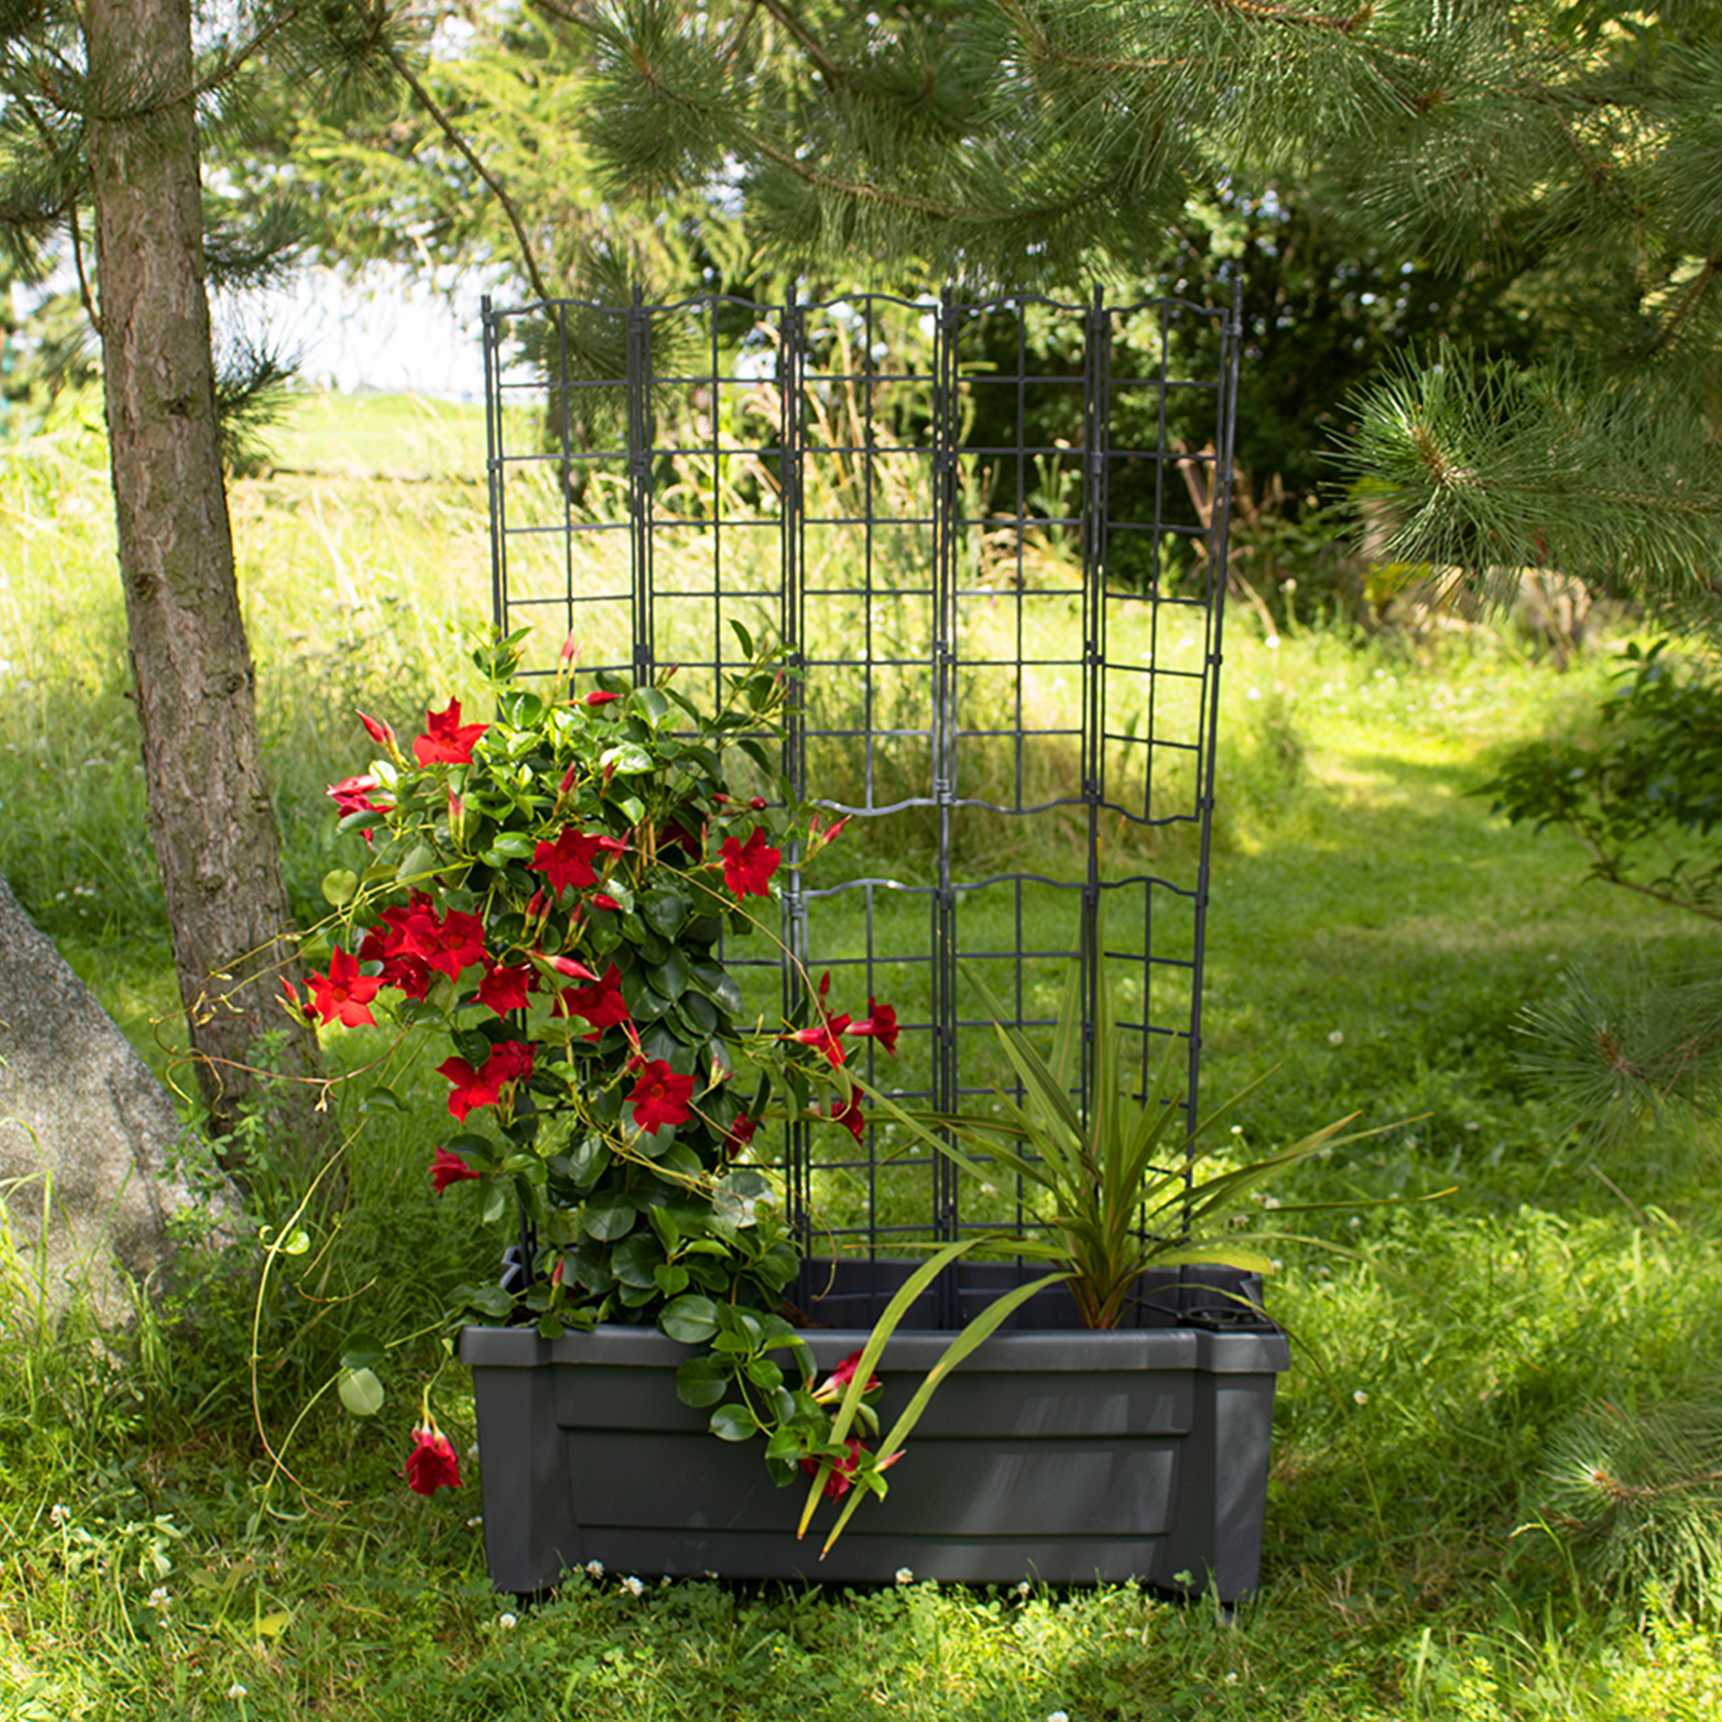 Planter box "Calypso" with watering system, modular trellis and wheels